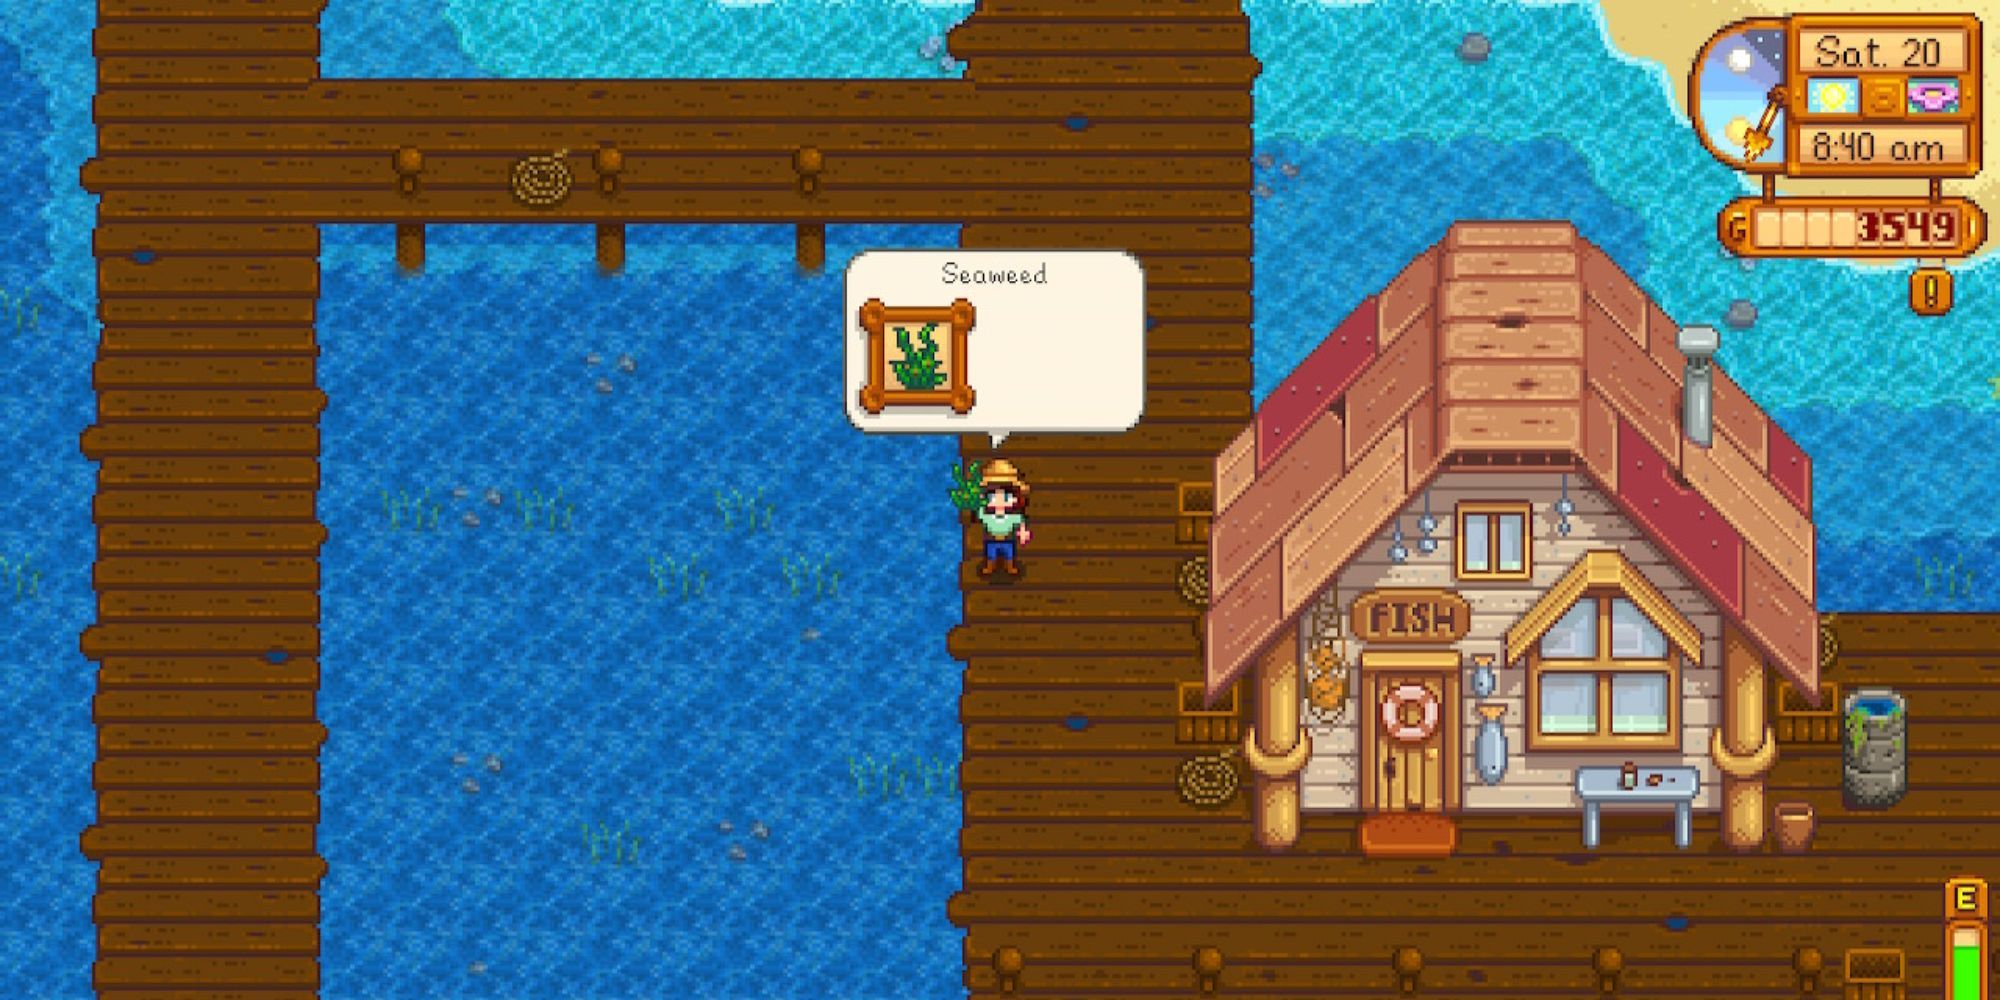 Fishing for seaweed in Stardew Valley